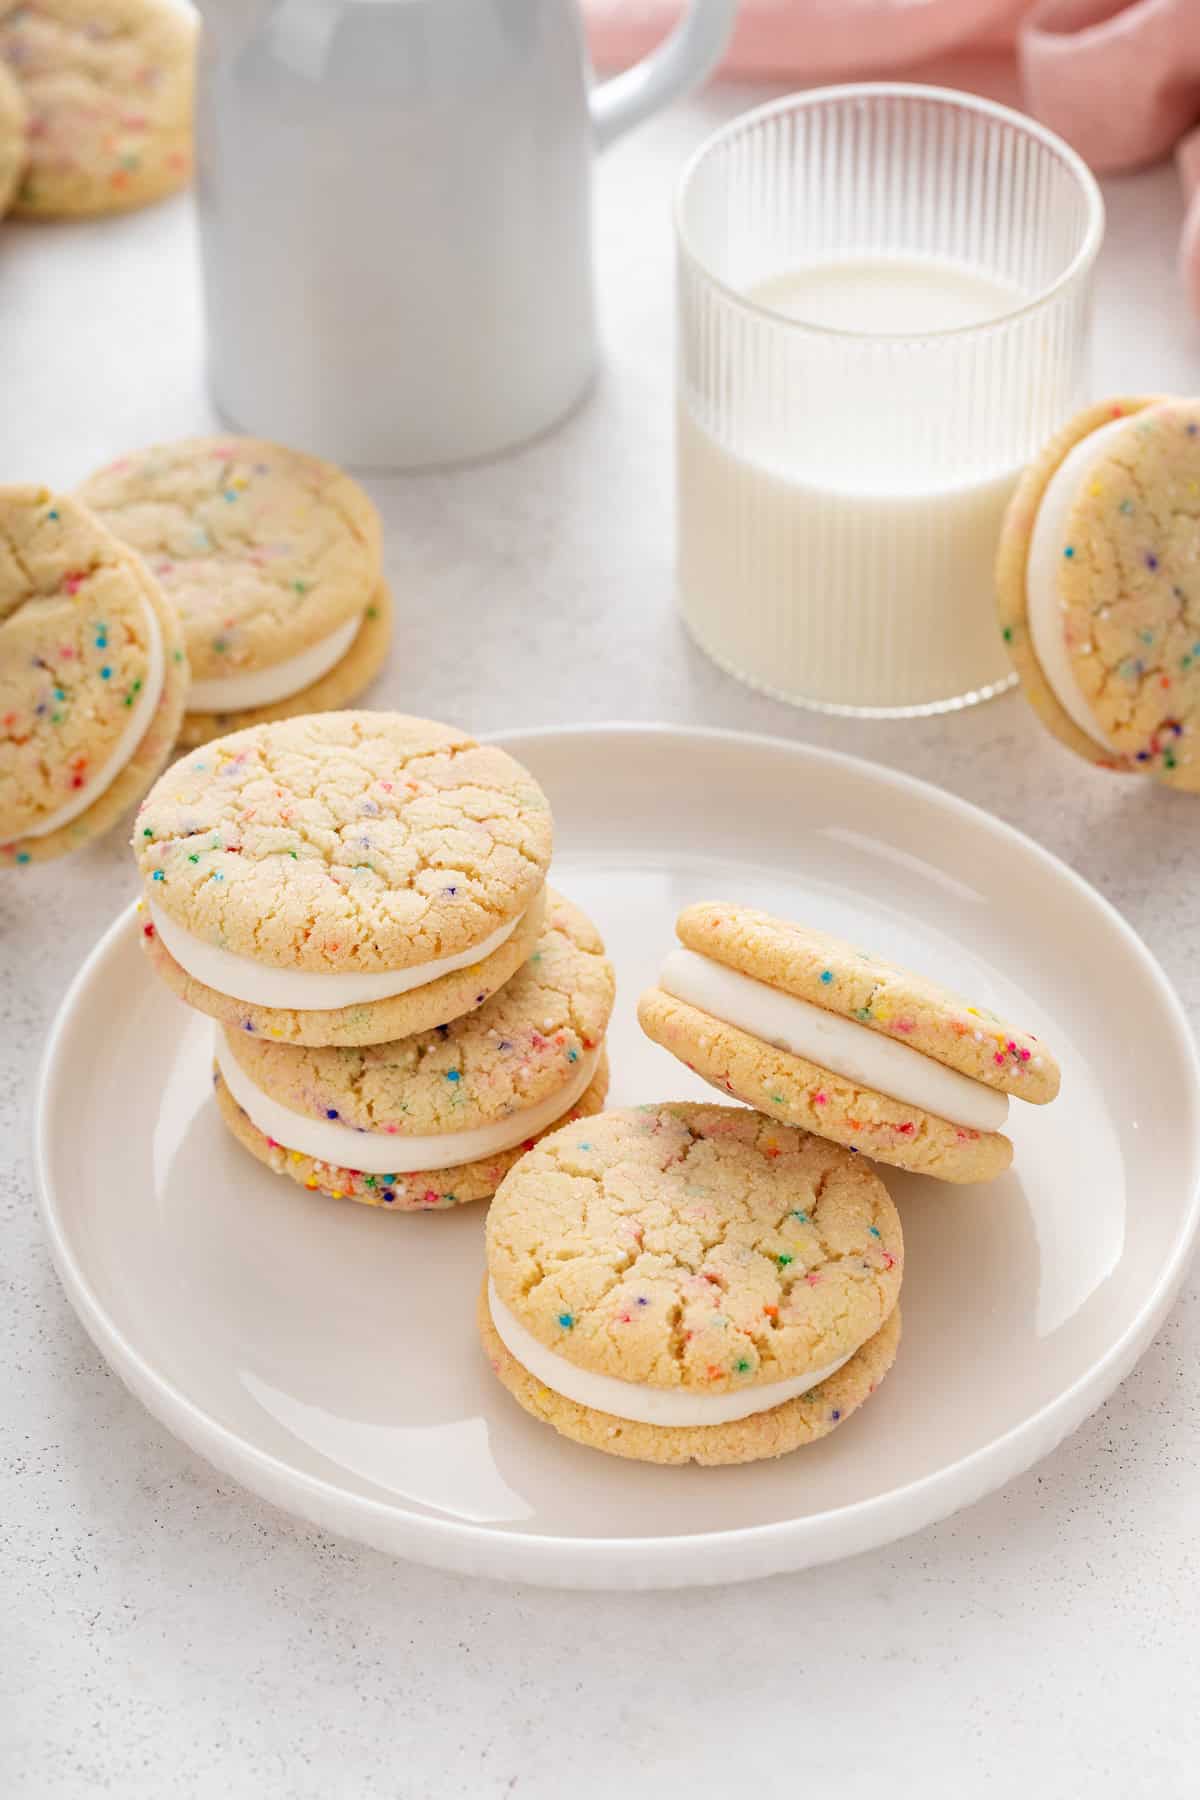 Four easy sugar cookie sandwiches arranged on a white plate next to a glass of milk.